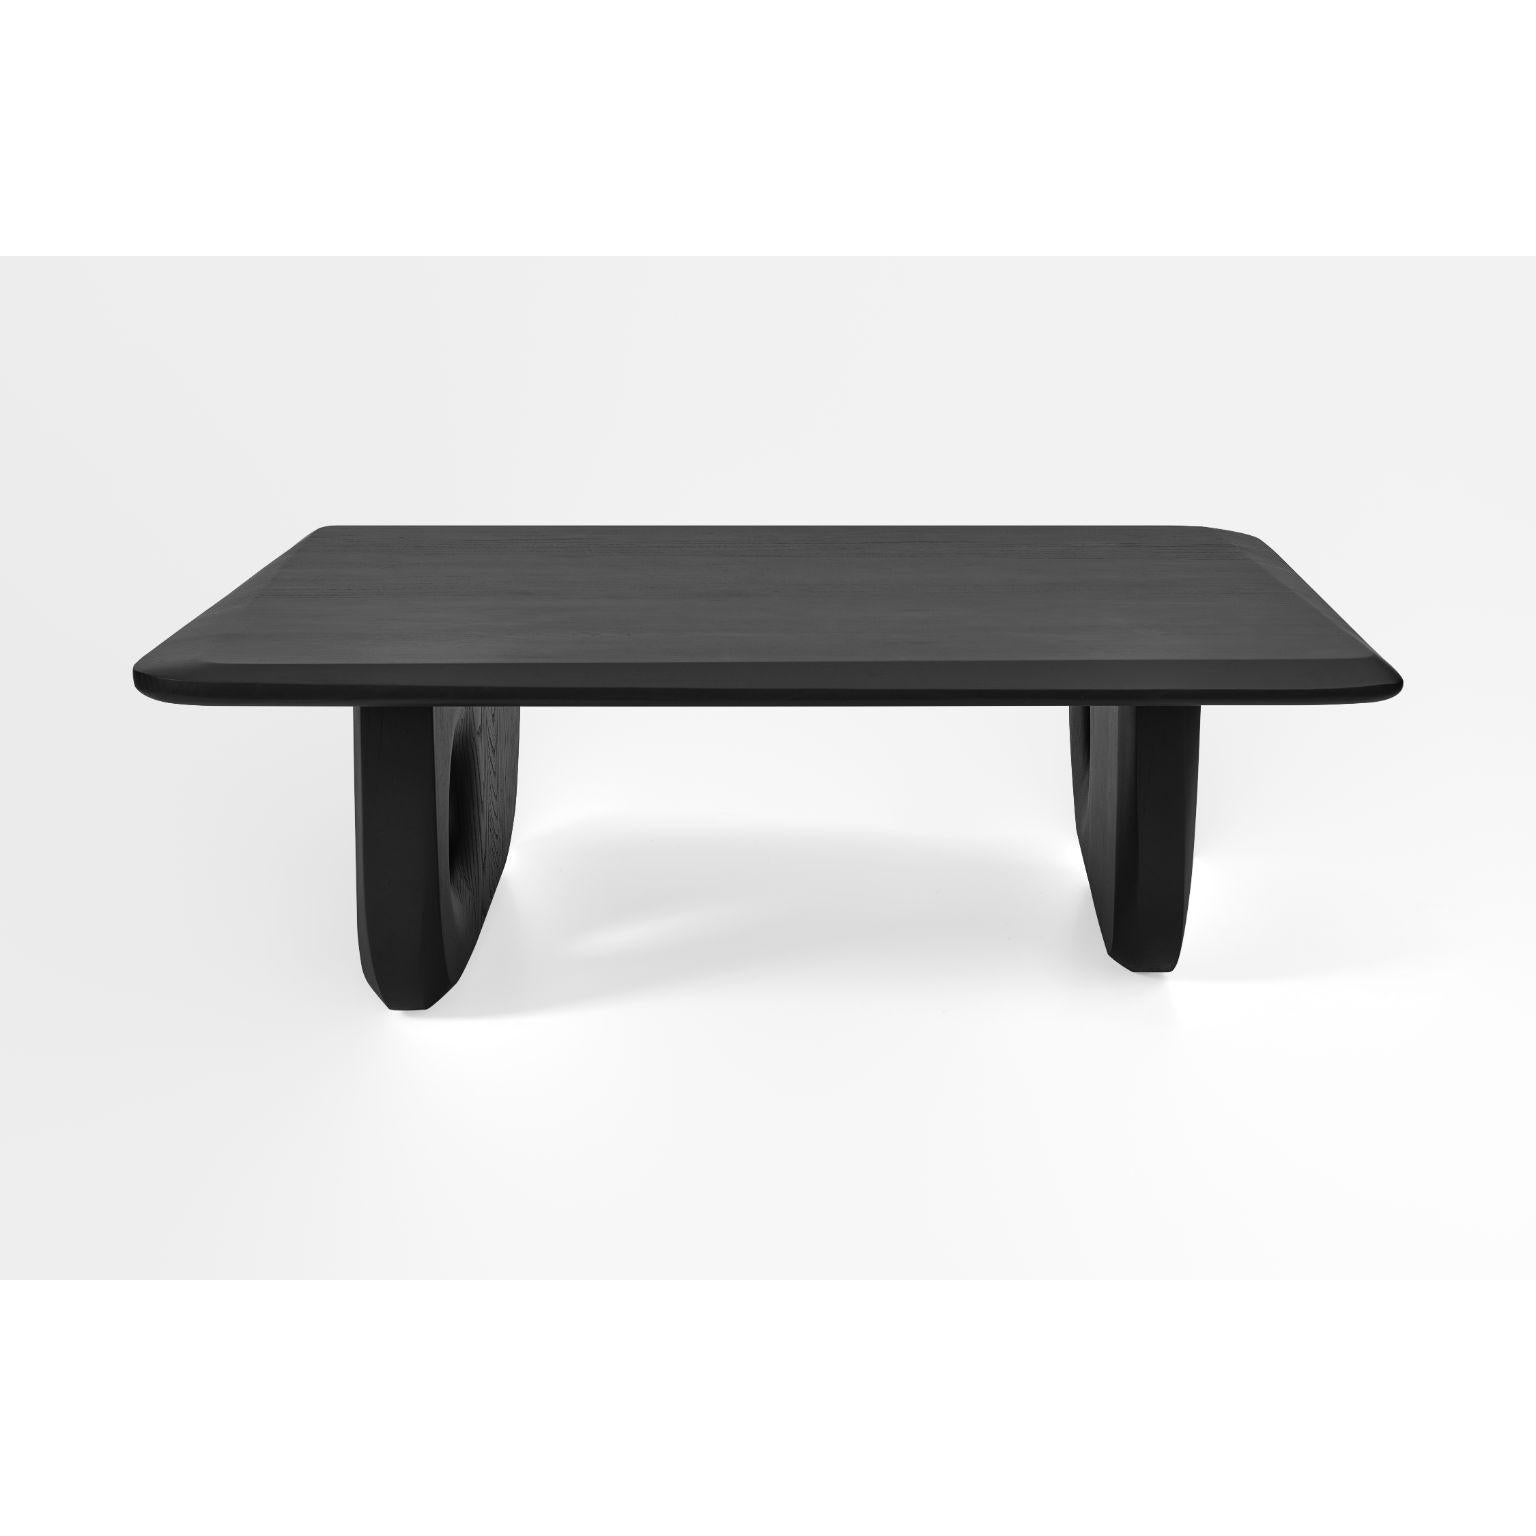 Zomana Low Table L by Contemporary Ecowood
Dimensions: W 127 x D 145 x H 45 cm.
Materials: American Oak.
Color: Transparent Black.

Contemporary Ecowood’s story began in a craft workshop in 2009. Our wood passion made us focus on fallen trees in the